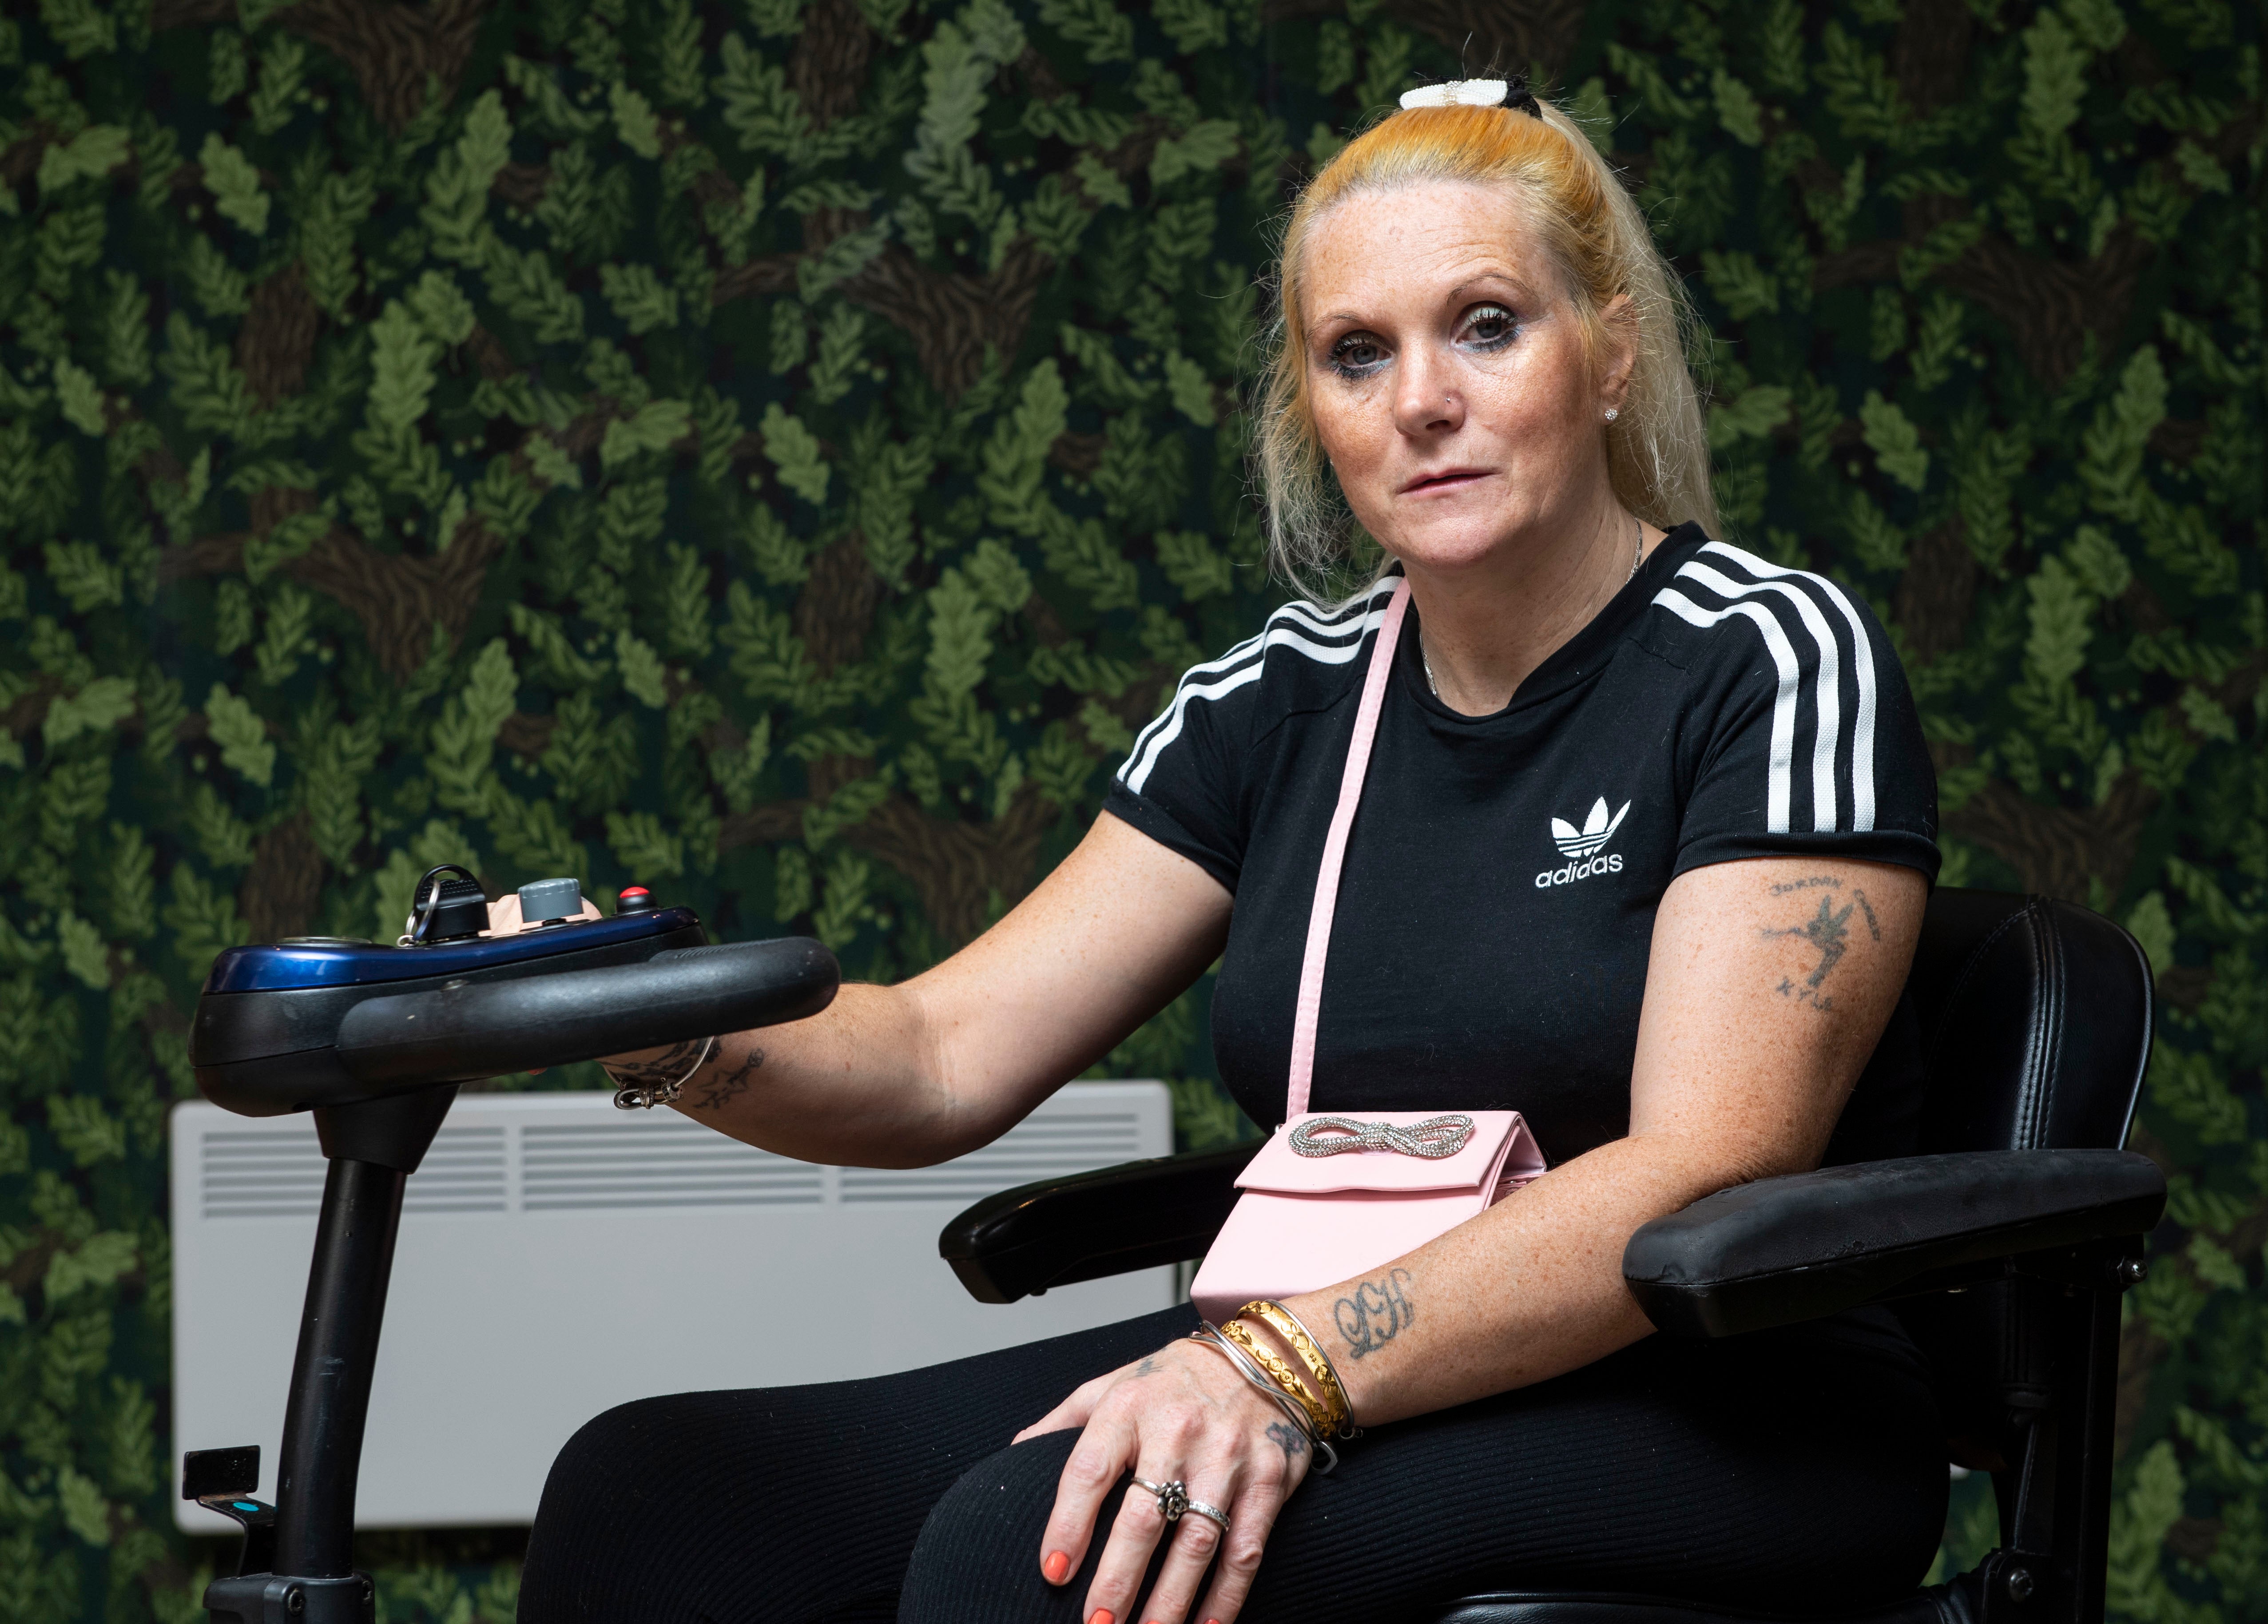 Jennifer Jones, who worries about being able to afford the power for her electric wheelchair, is one of those facing tough choices during the cost of living crisis